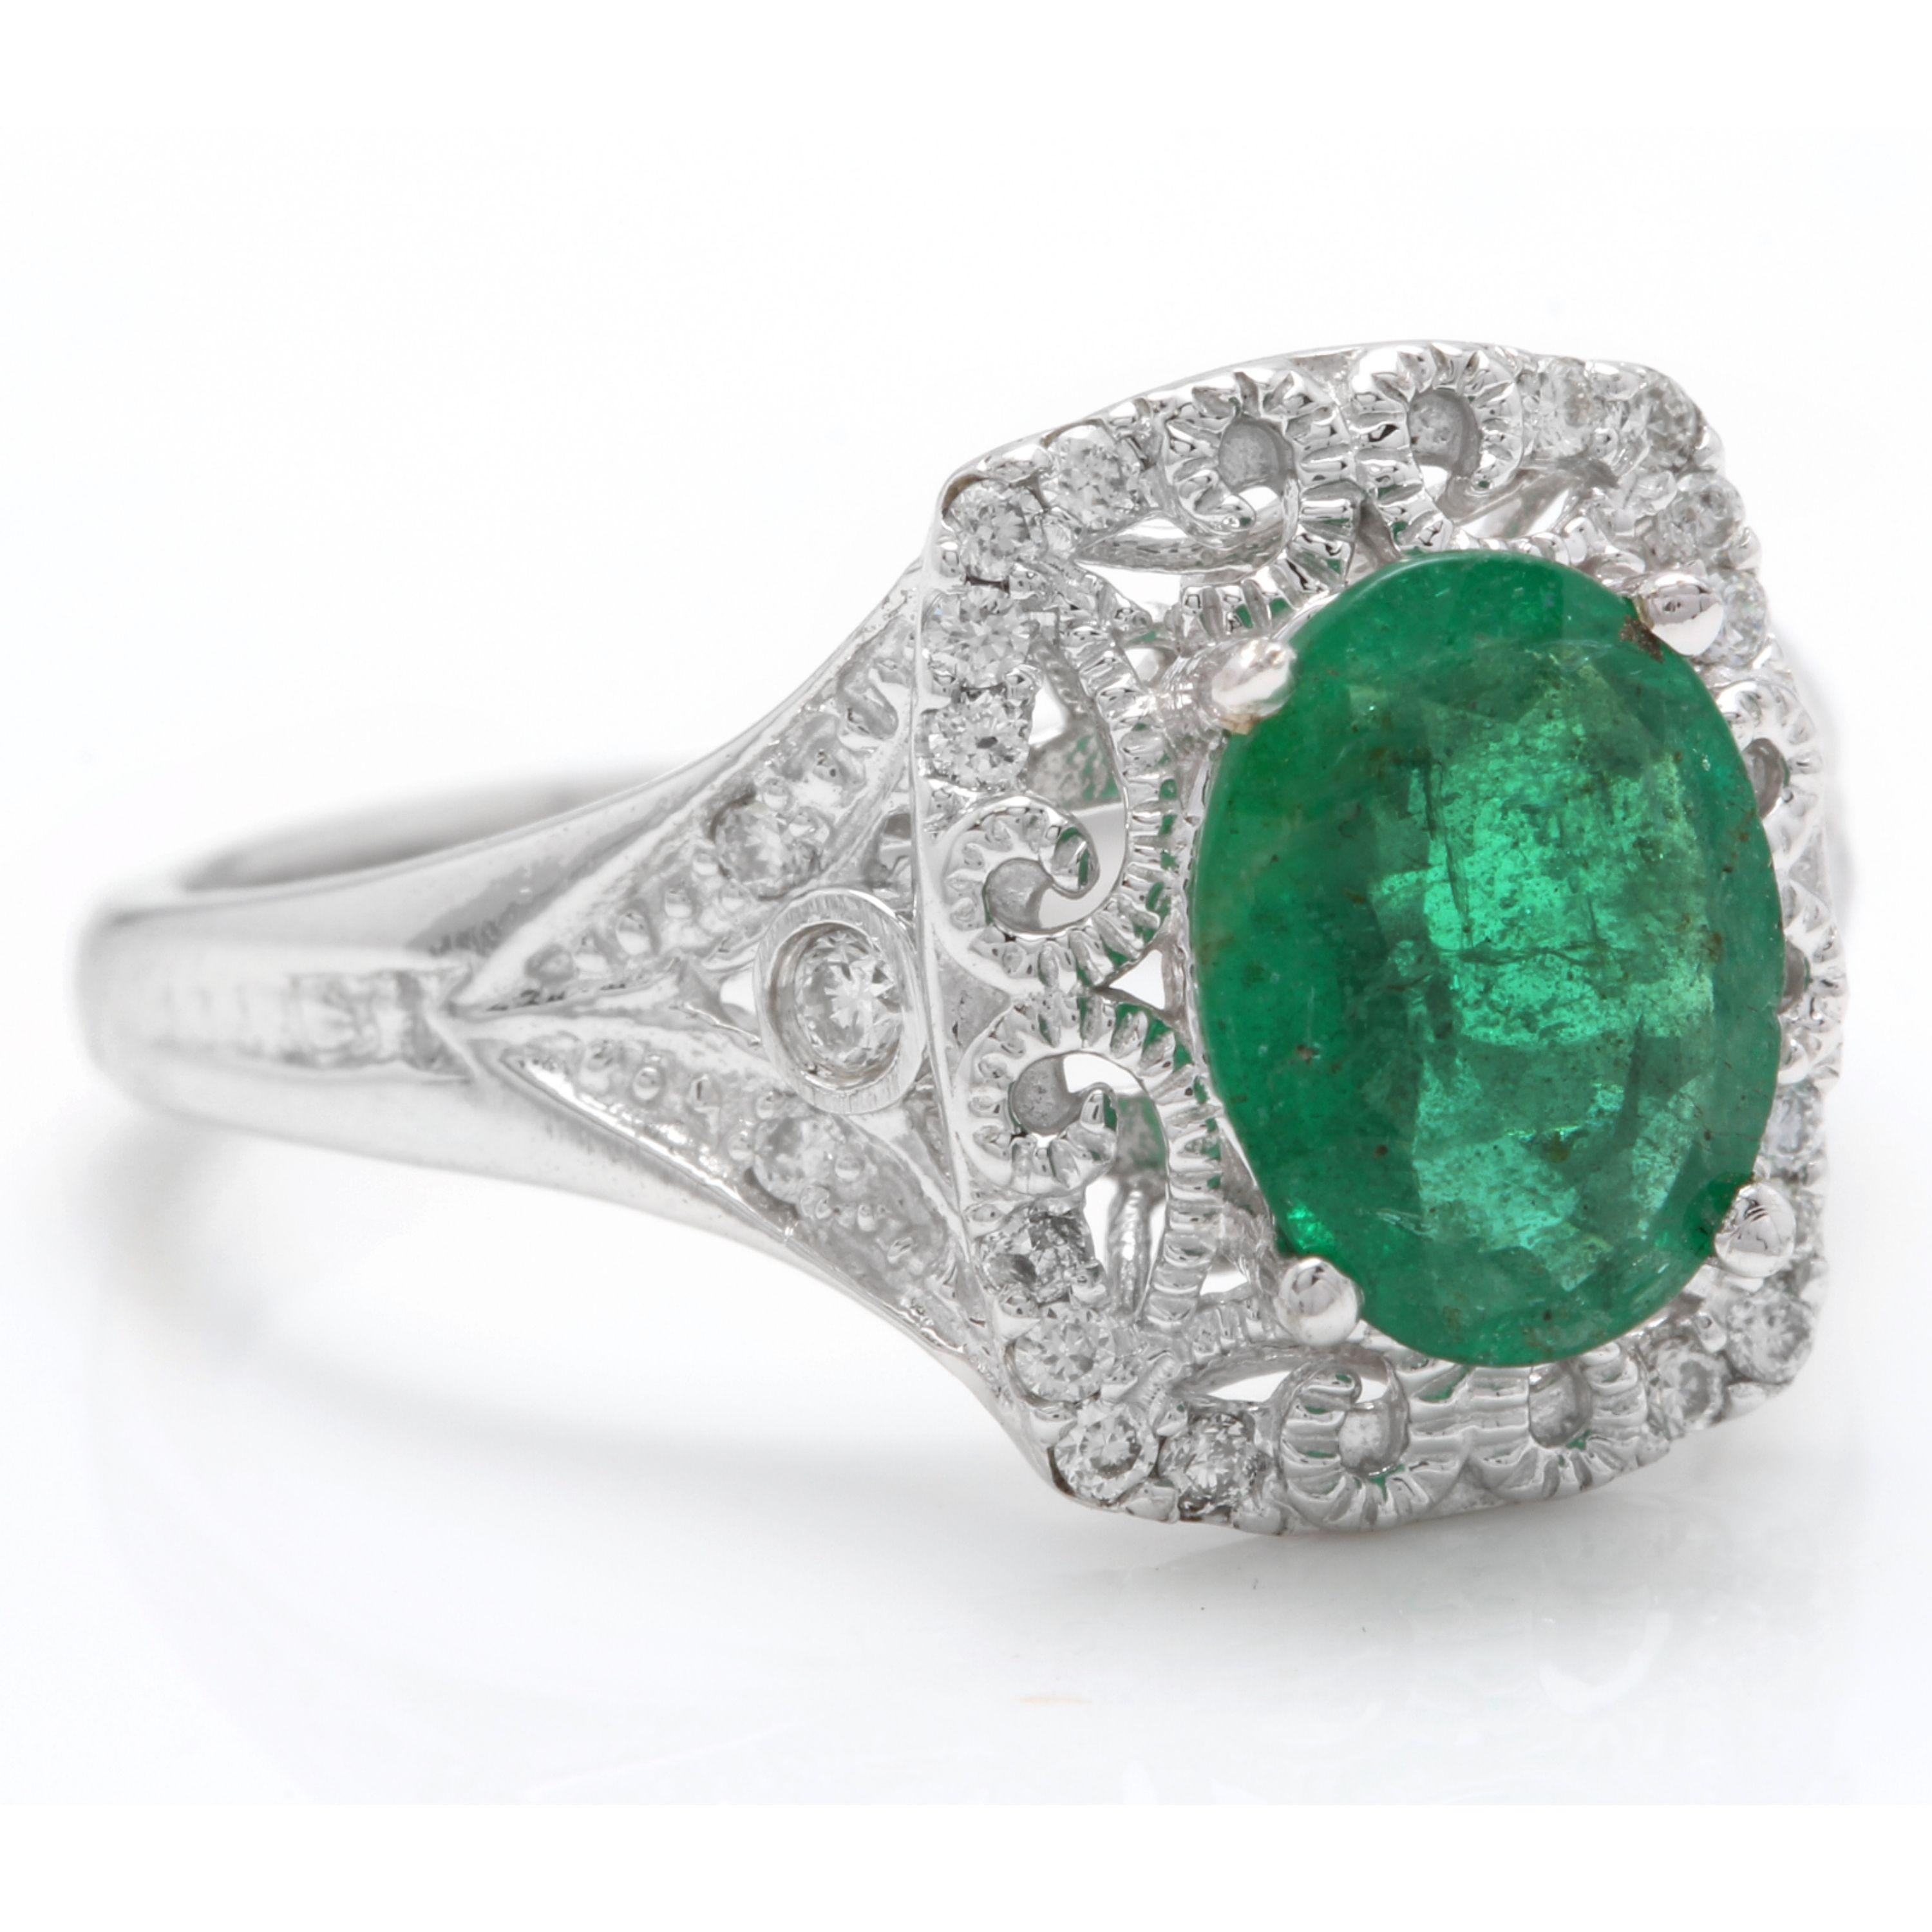 1.50 Carats Natural Emerald and Diamond 14K Solid Yellow Gold Ring

Total Natural Green Emerald Weight is: Approx. 1.50 Carats (transparent)

Emerald Measures: Approx. 9.00 x 7.00mm

Natural Round Diamonds Weight: 0.20 Carats (color G-H / Clarity